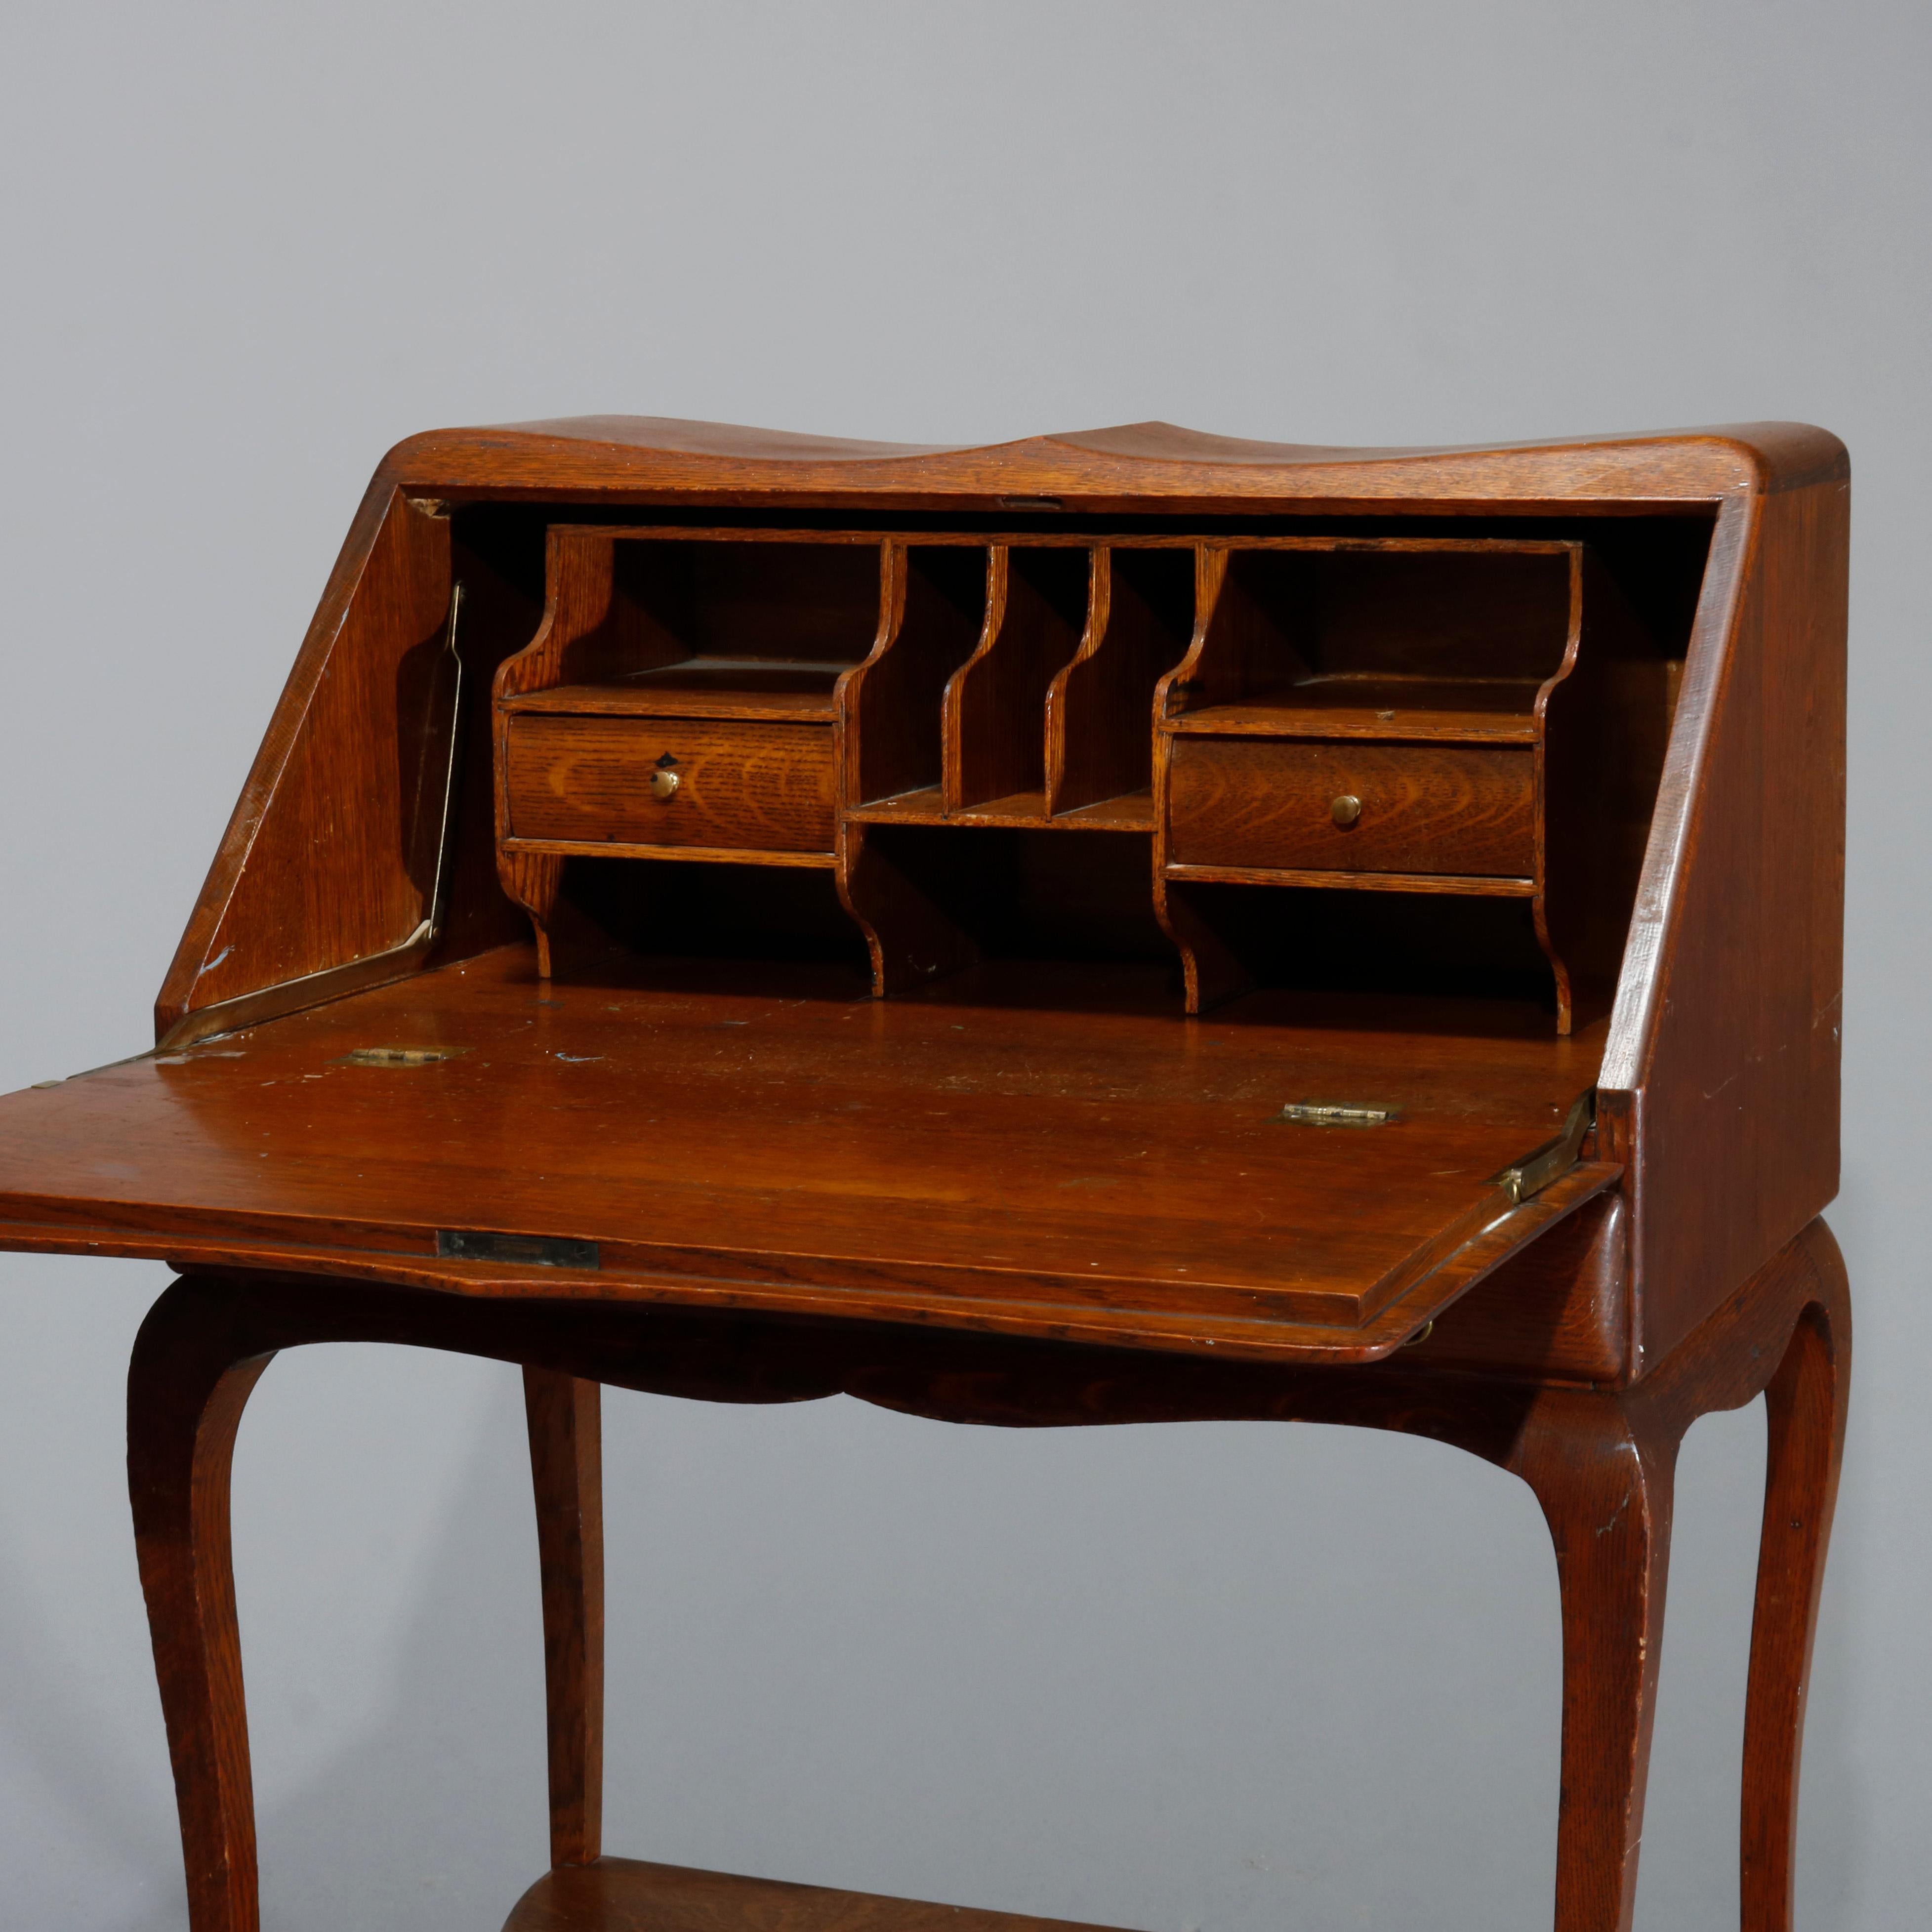 An antique ladies writing desk in the manner of RJ Horner offers quarter sawn oak construction with shaped case having slant drop-front desk over single long drawer and raised on cabriole legs having lower shaped shelf, c1910.

Measures: 39.5